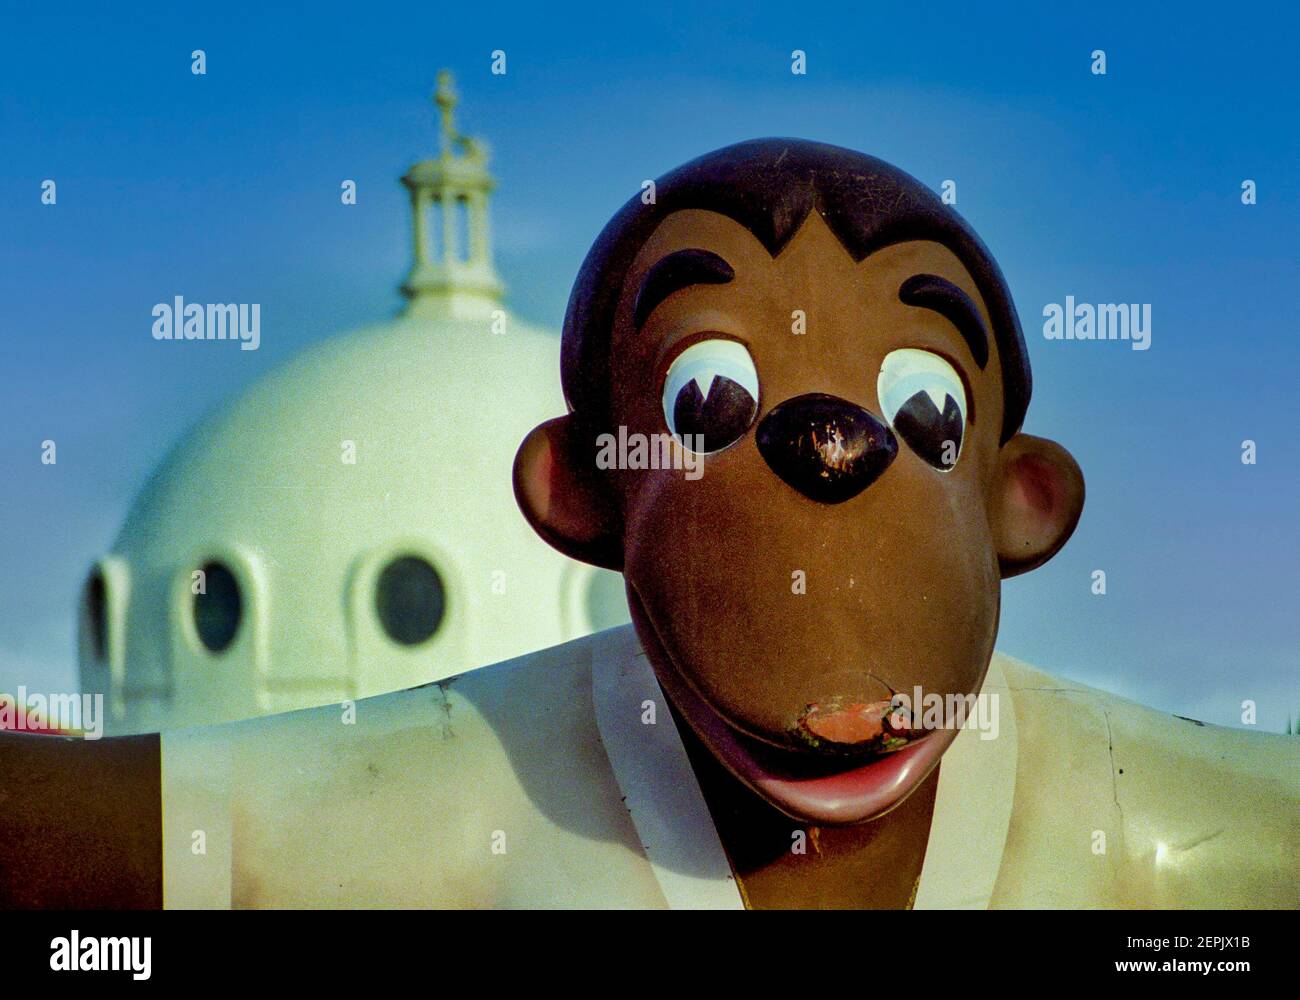 Cardboard cartoon character on top of a carnival ride in the Spanish City, in Whitley Bay, England. Stock Photo